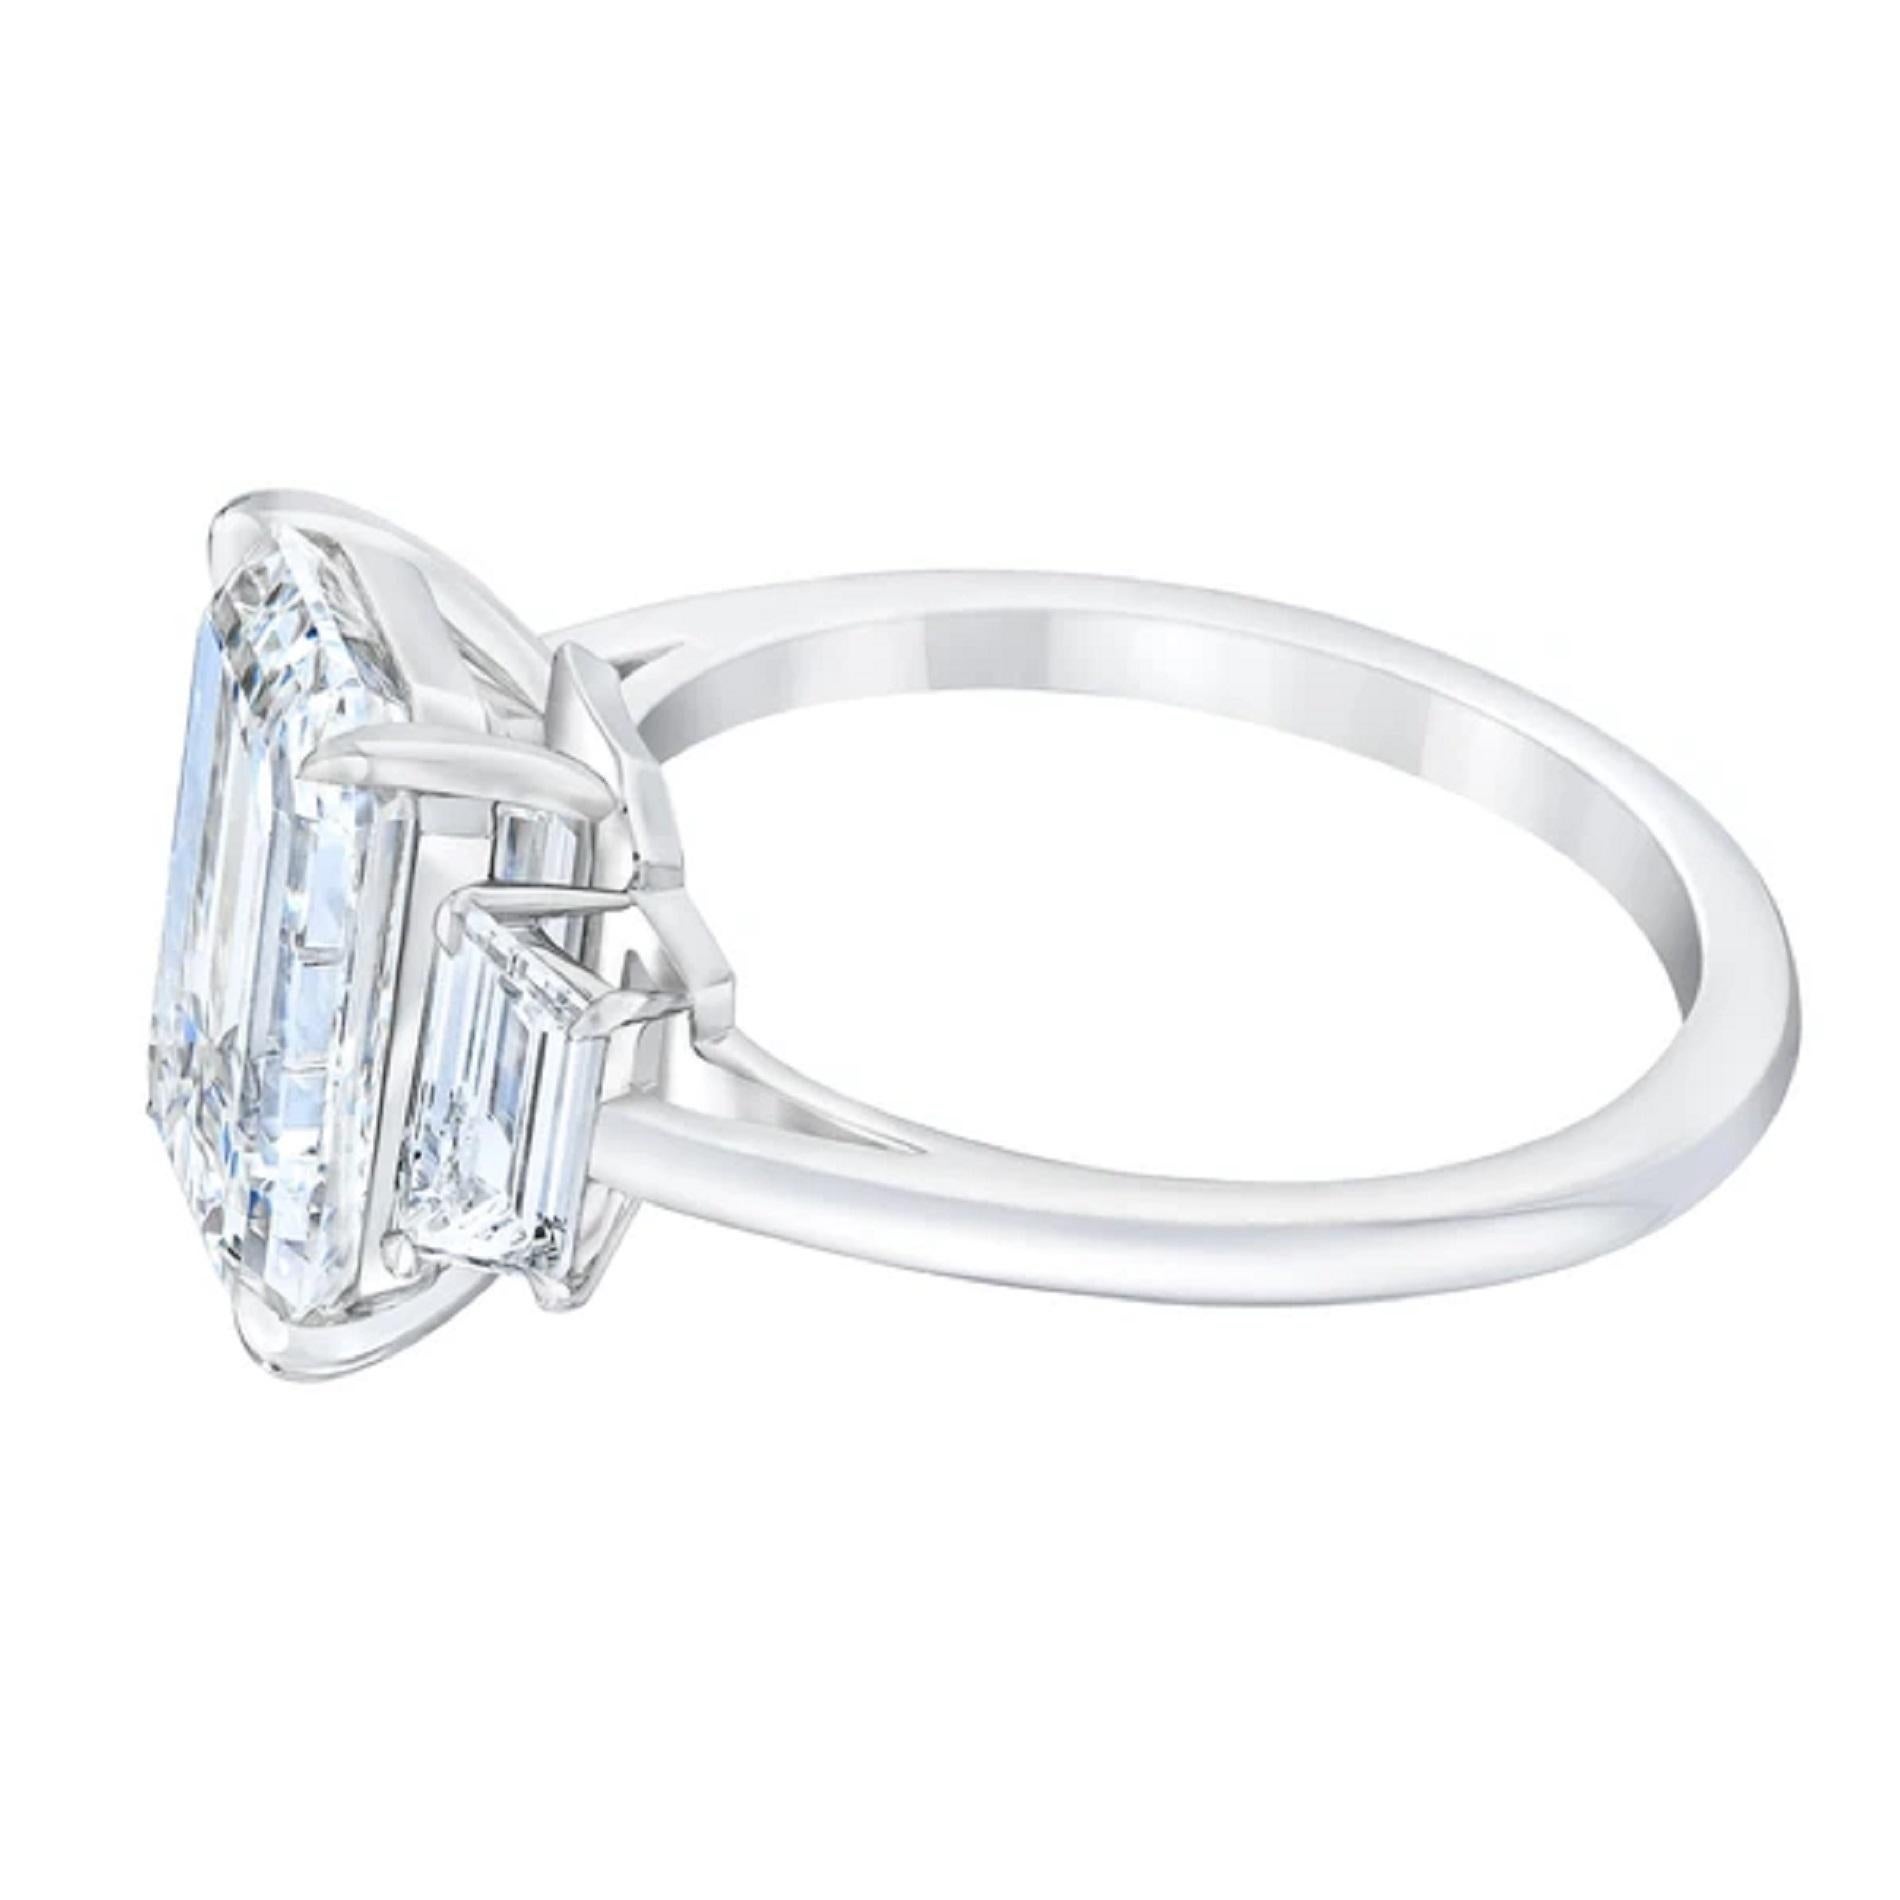 An extraordinary GIA certified 5 carat emerald cut diamond ring.
The main stone is an i color vs1 Clarity 100%eye  clean stone
Excellent luster and excellent performance
None Fluorescence

Please take a look at the video price is exceptional also